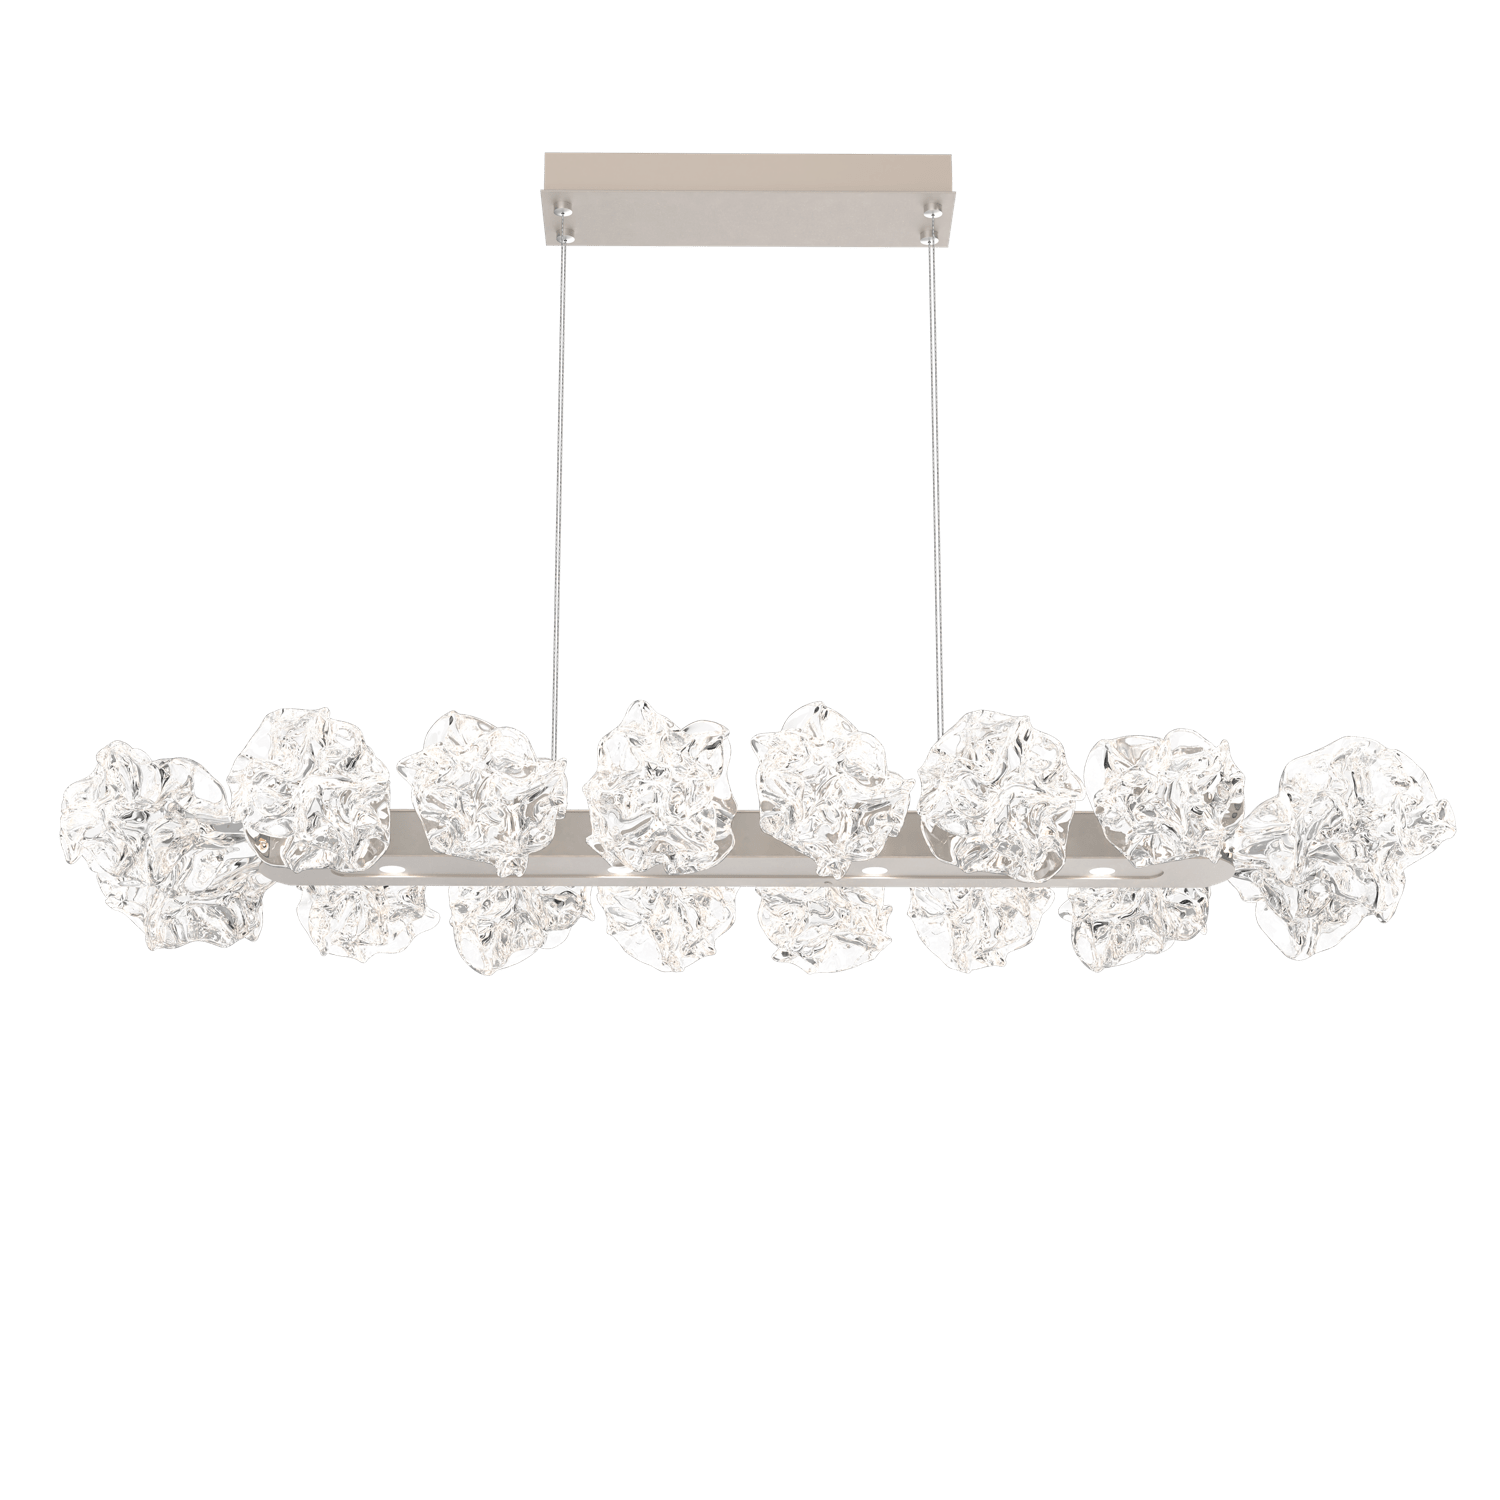 PLB0059-48-BS-Hammerton-Studio-Blossom-48-inch-linear-chandelier-with-metallic-beige-silver-finish-and-clear-handblown-crystal-glass-shades-and-LED-lamping